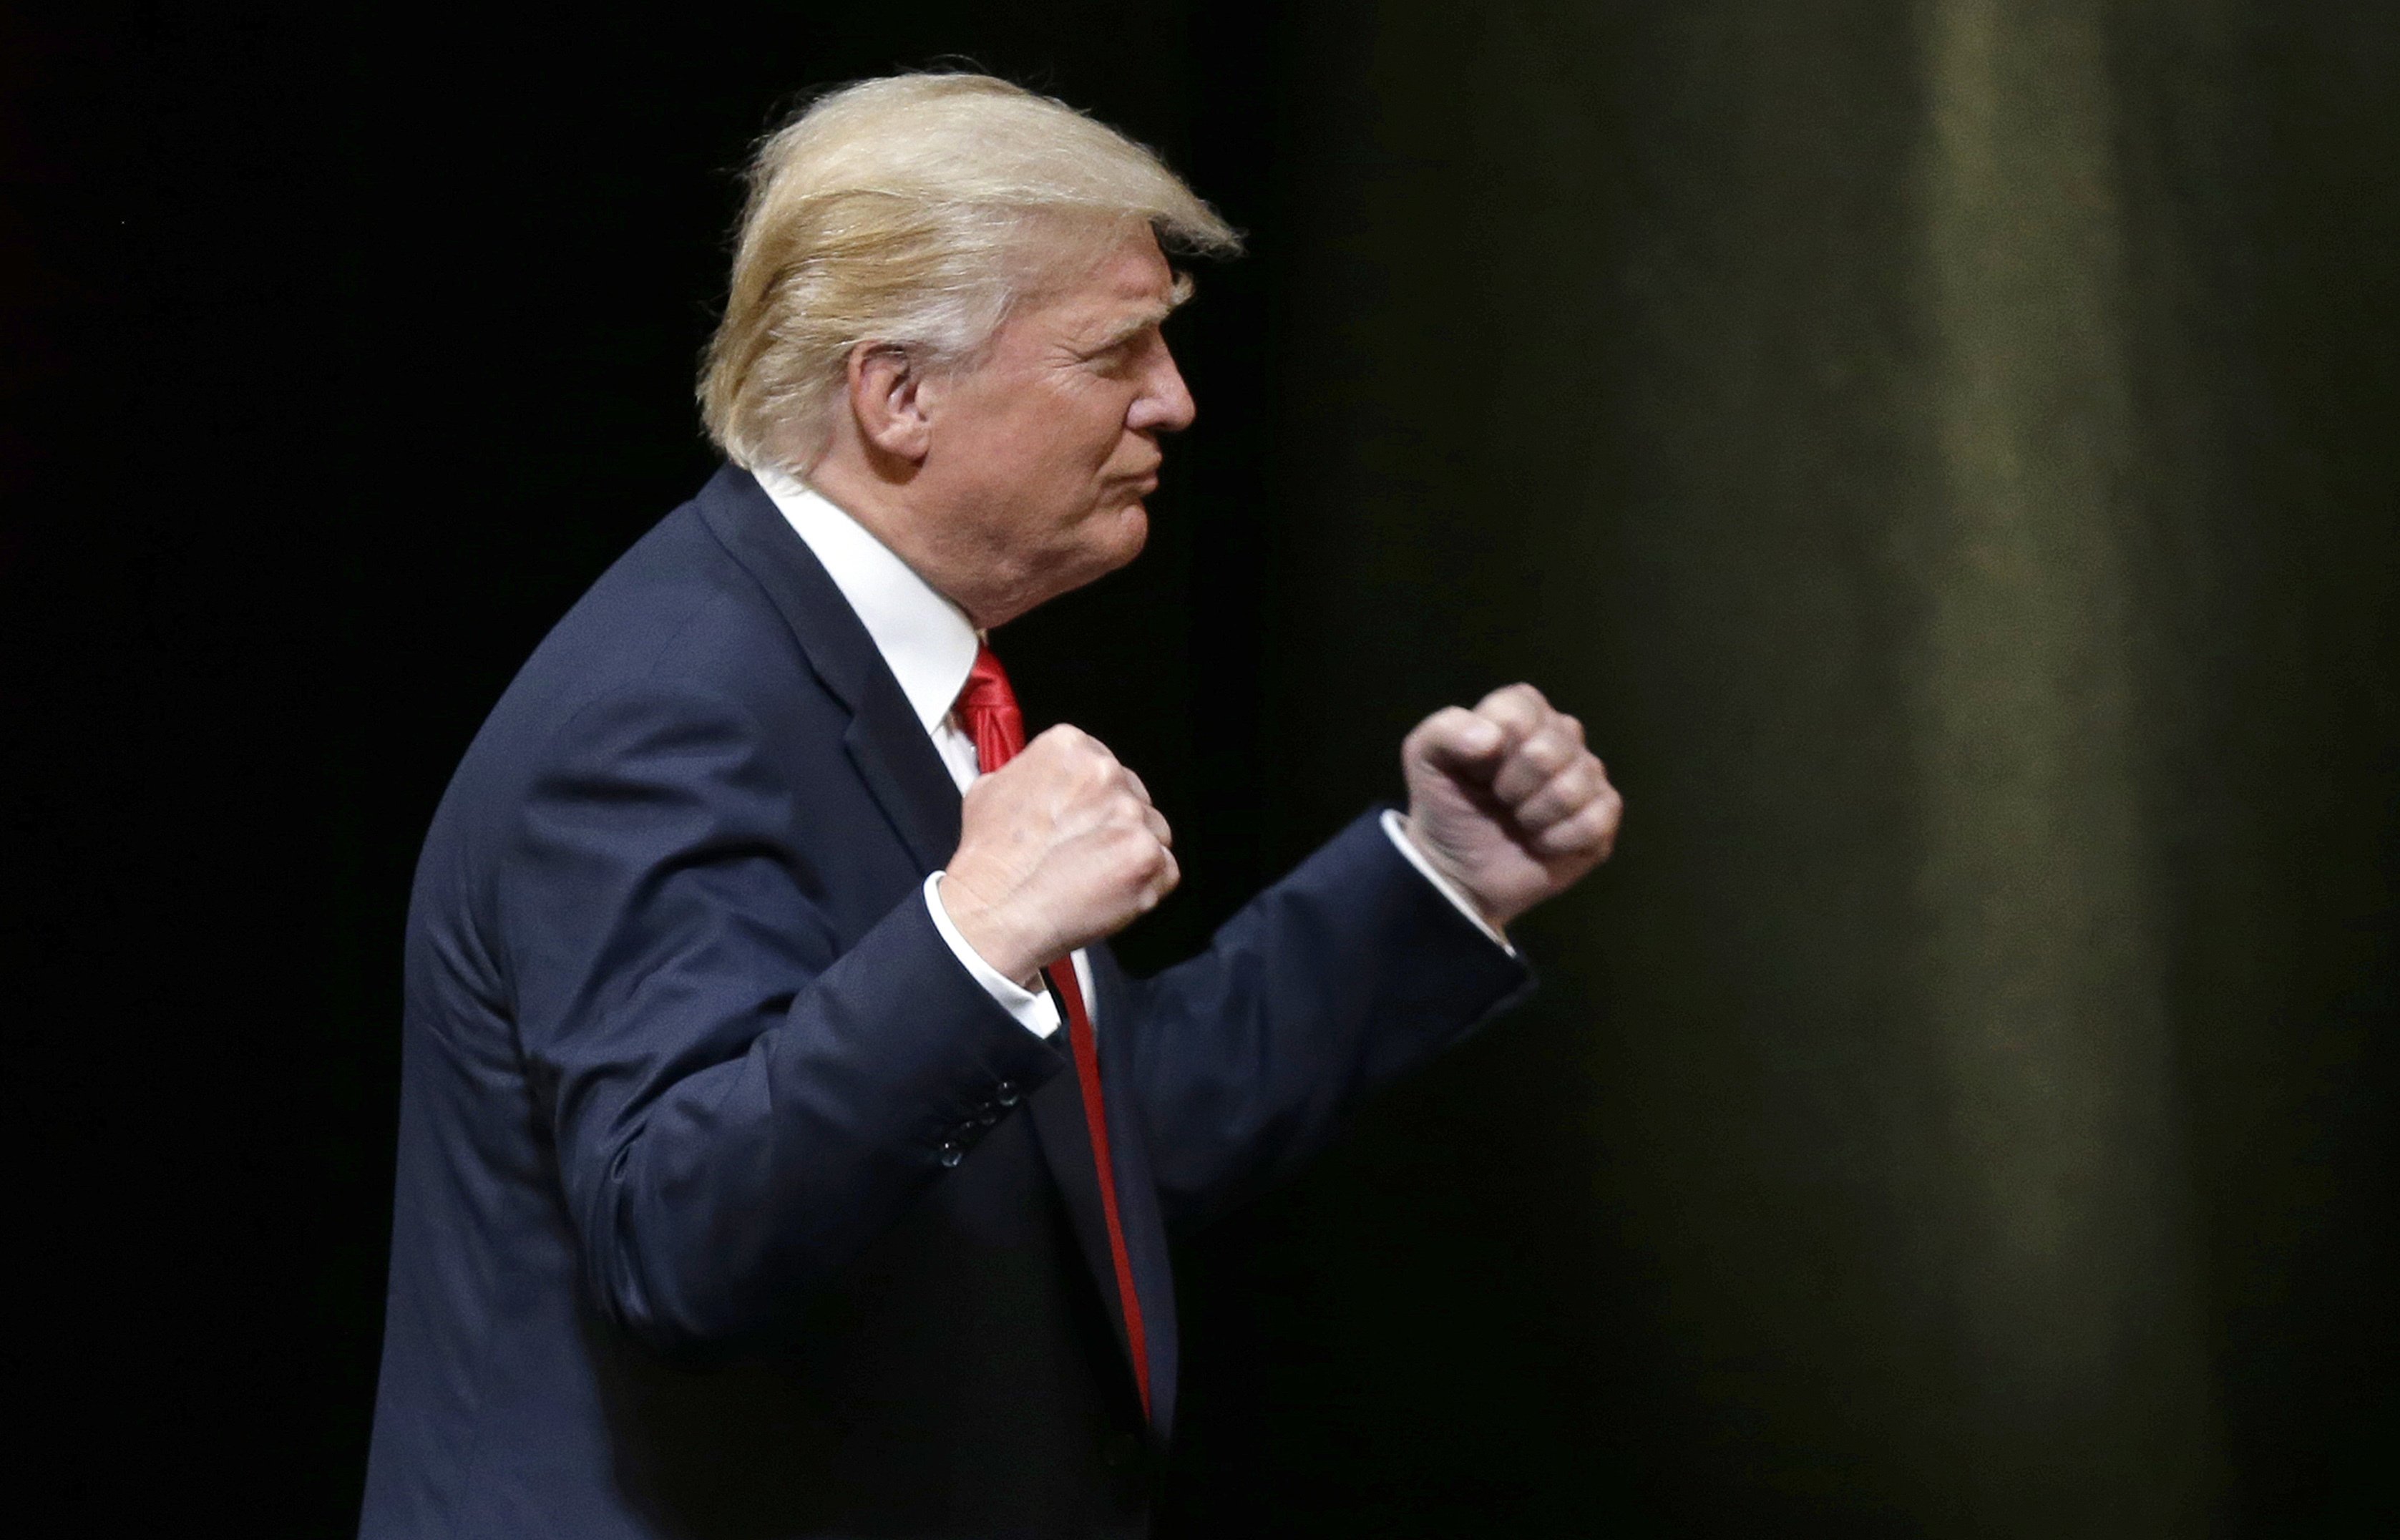 Donald Trump pumps his fists during a rally in Raleigh, N.C., on July 5, 2016. (Gerry Broome&mdash;AP)